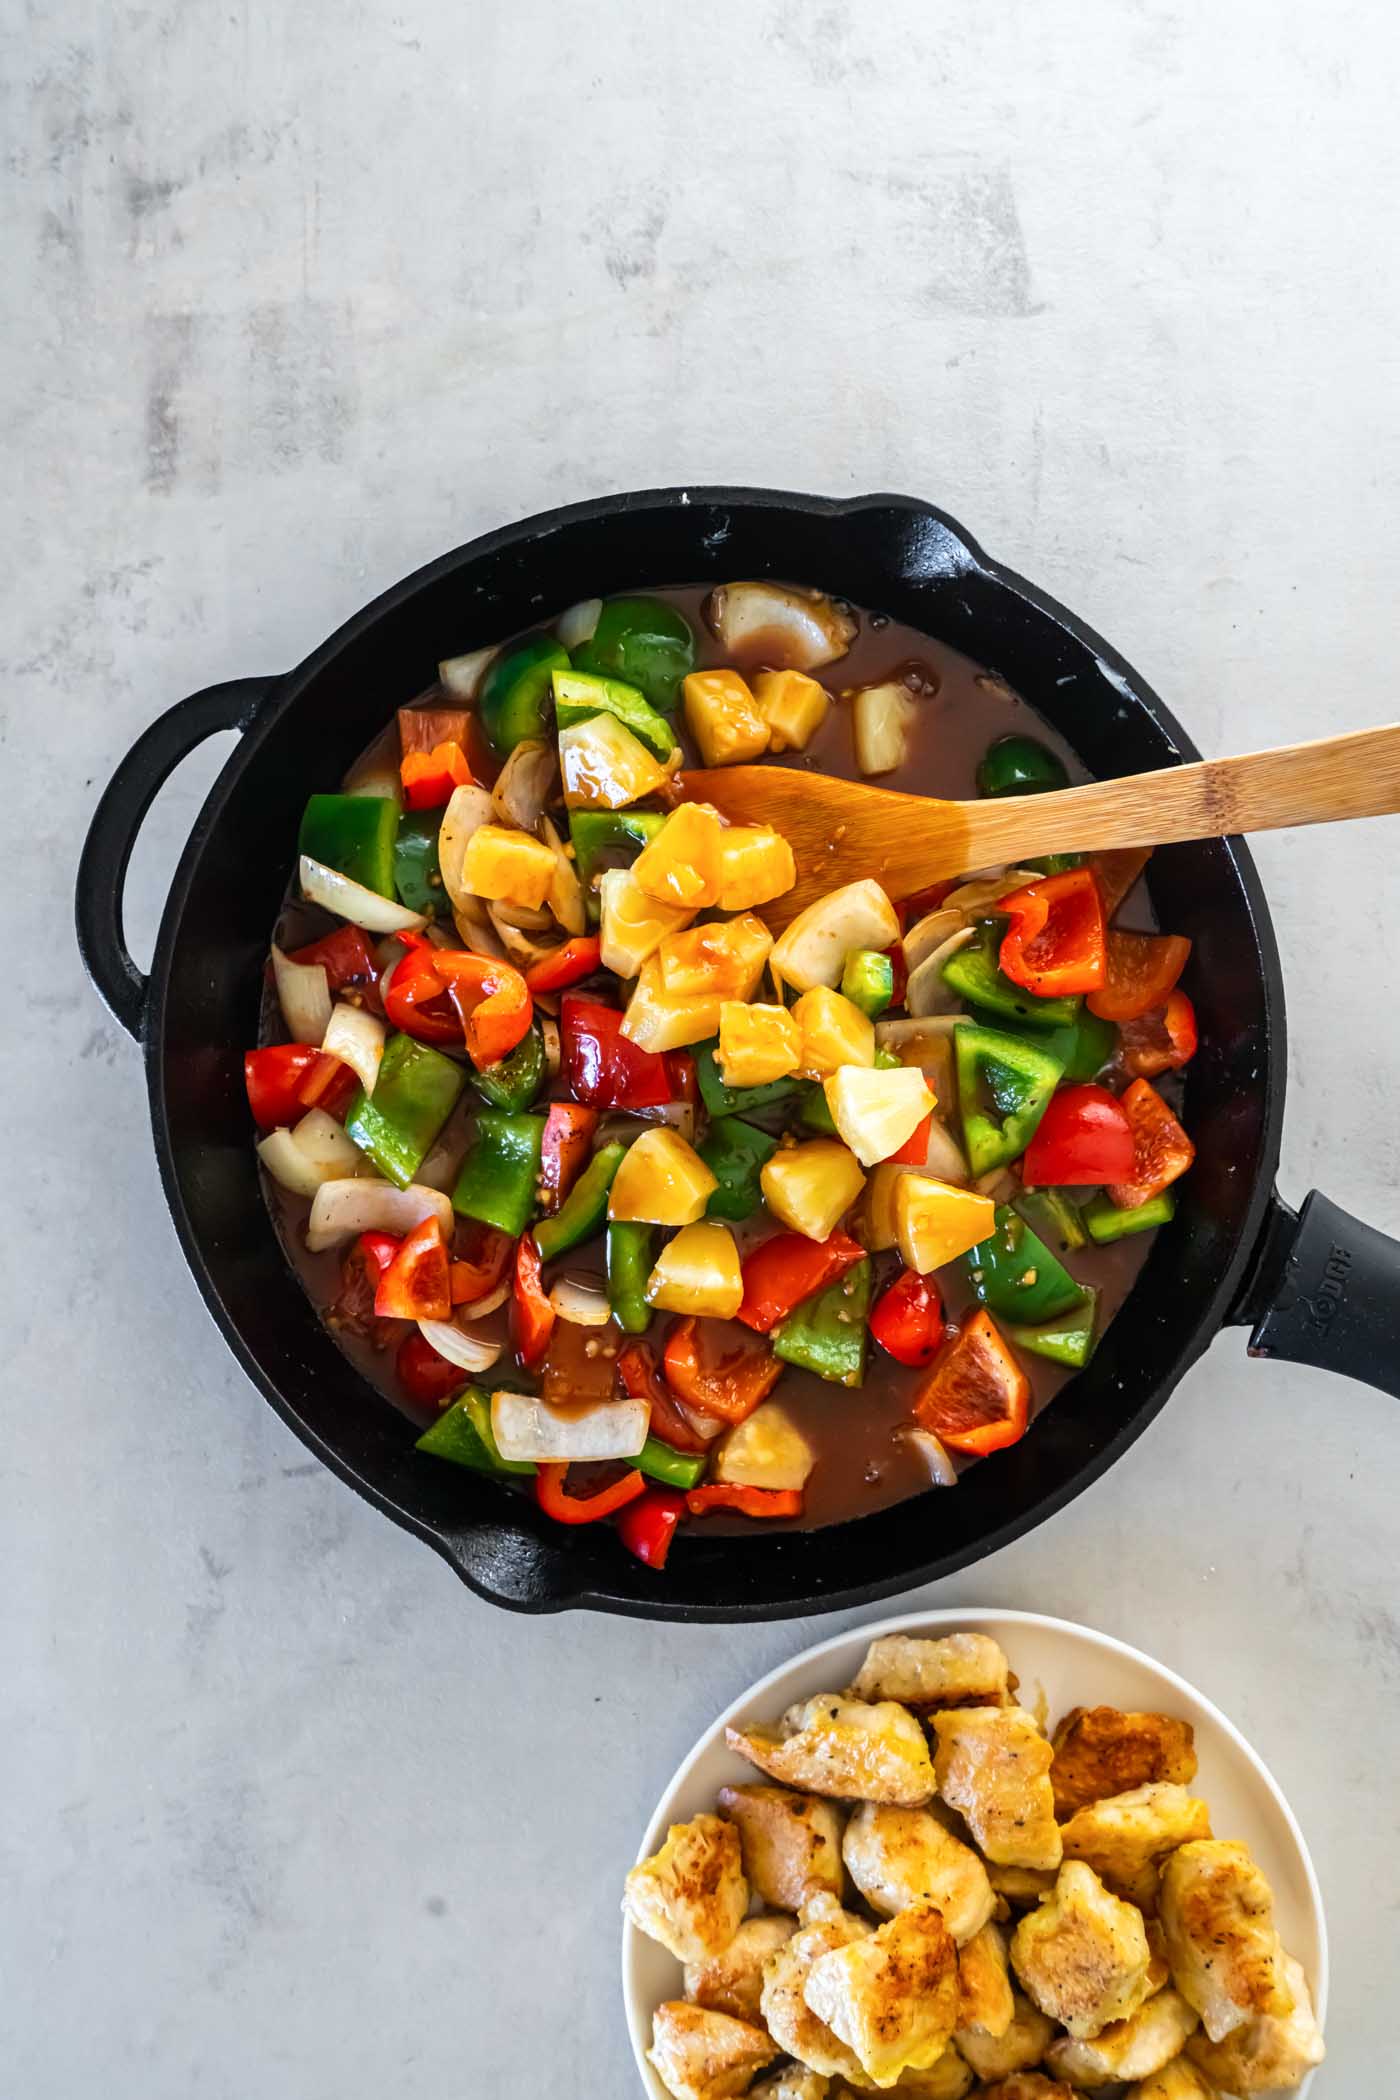 Sweet and sour sauce and pineapple added to skillet.